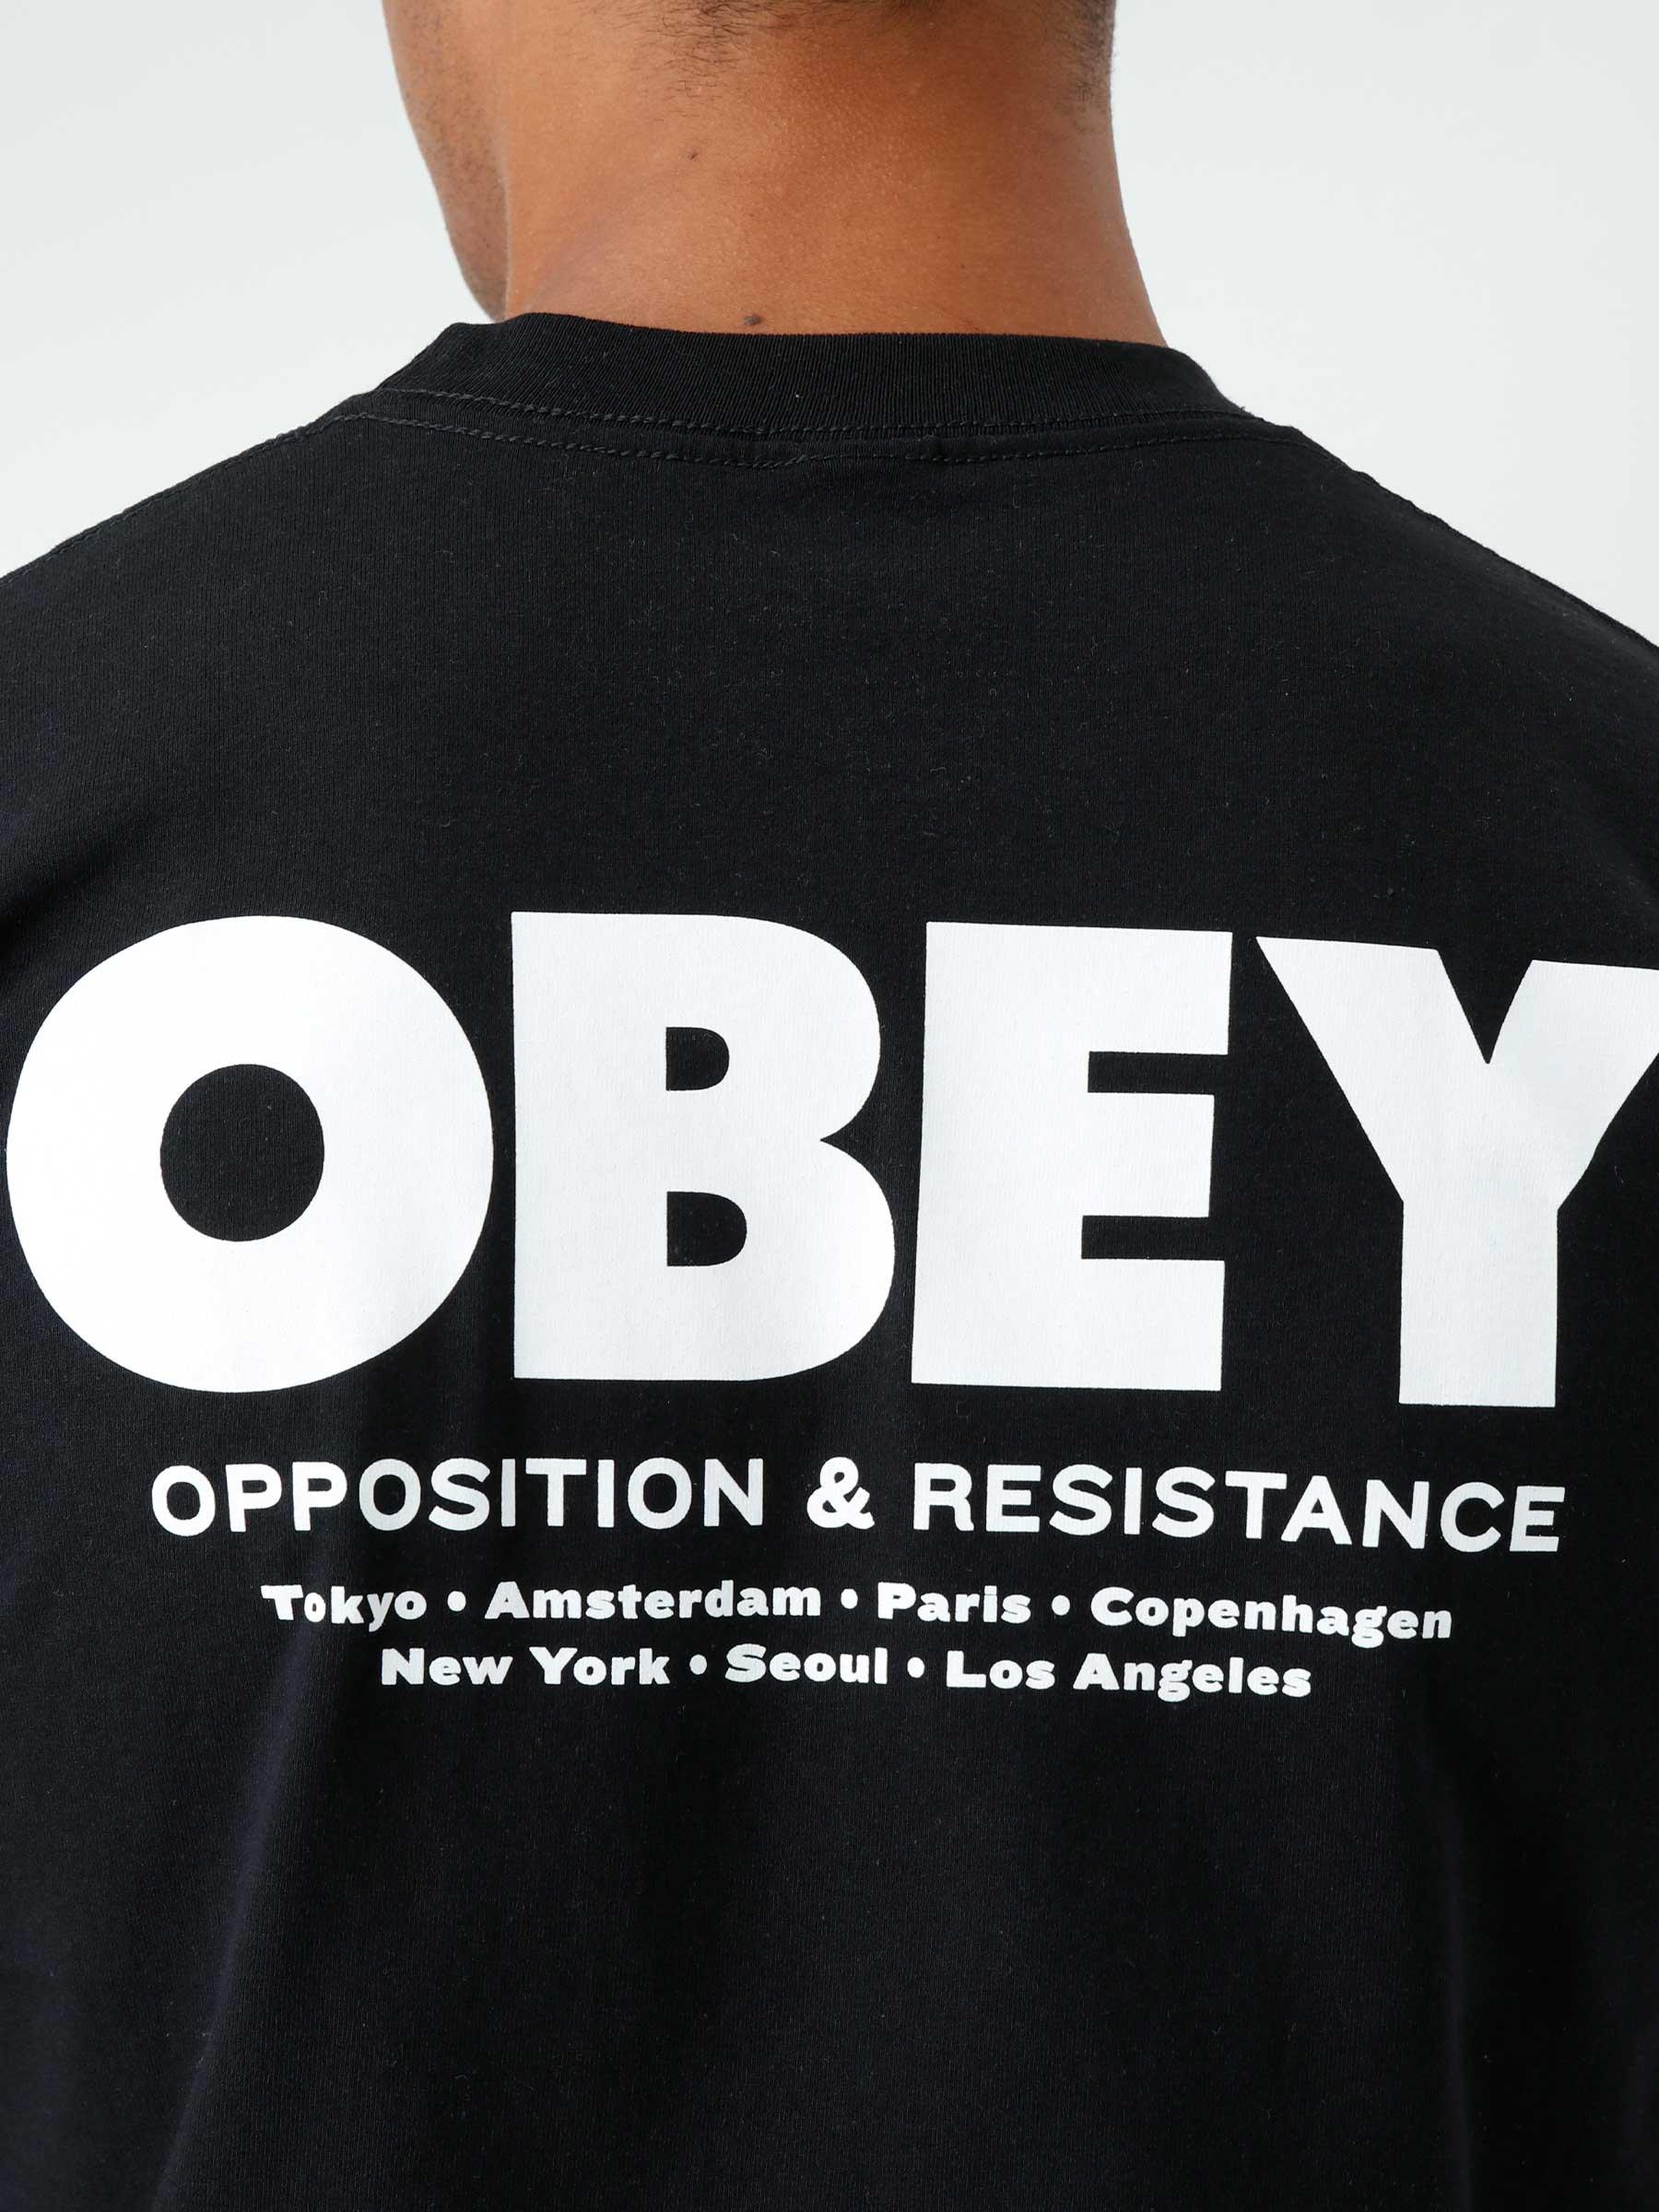 Obey Opposition & Resistance T-shirt Black 165263234